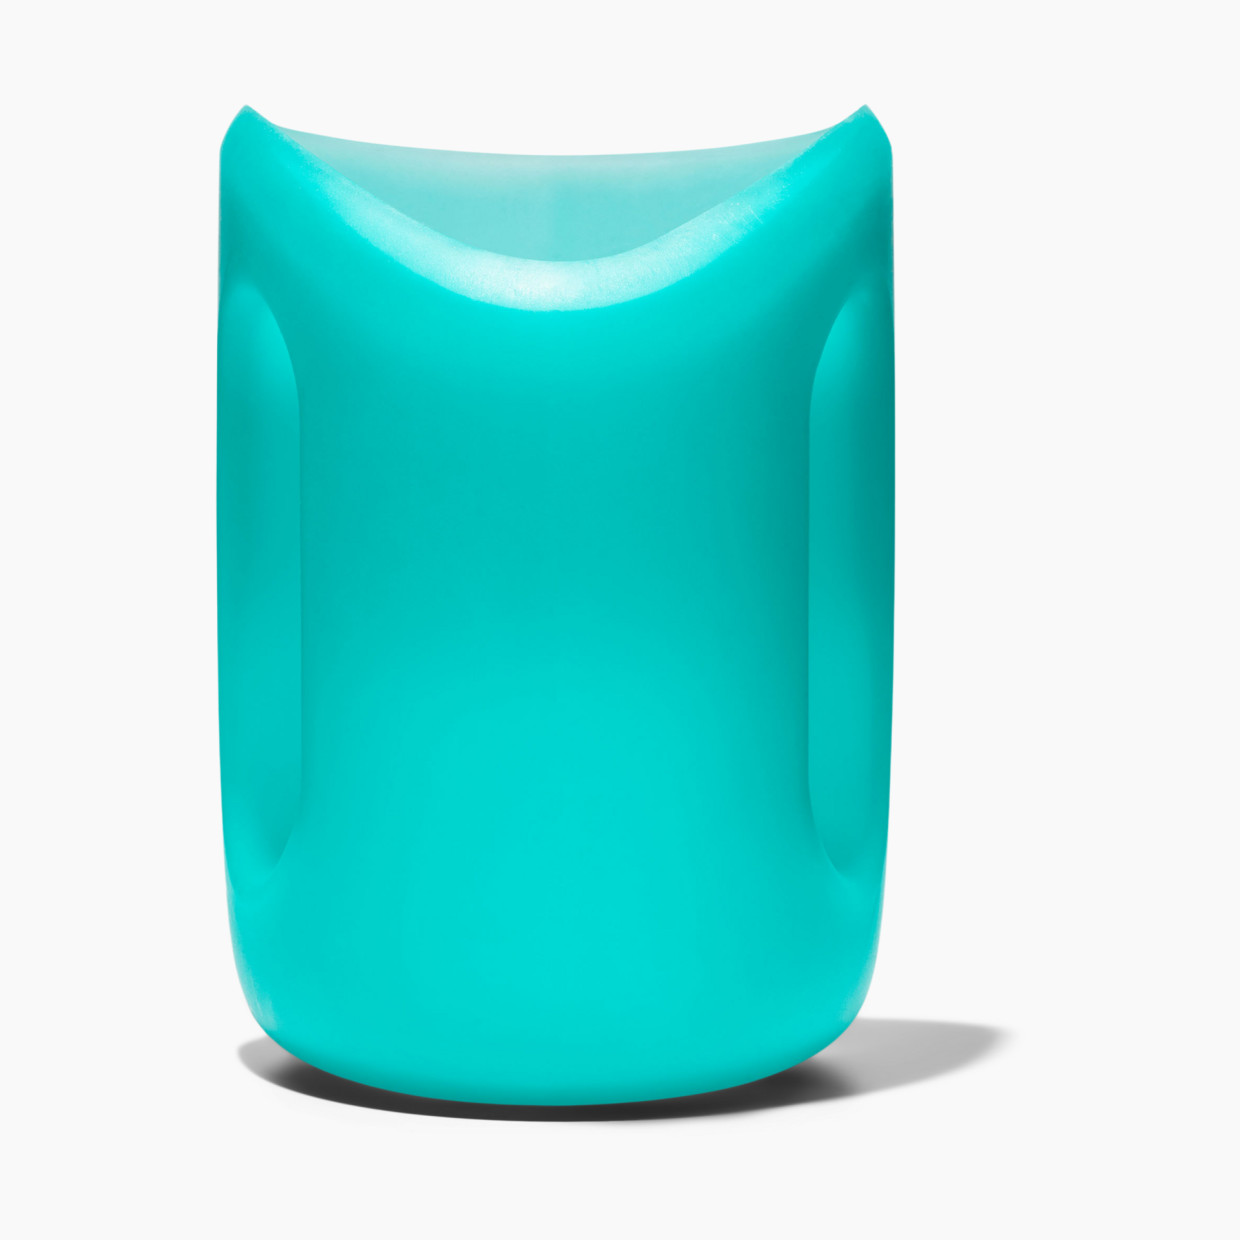 OXO Tot Shampoo Rinser - Teal.